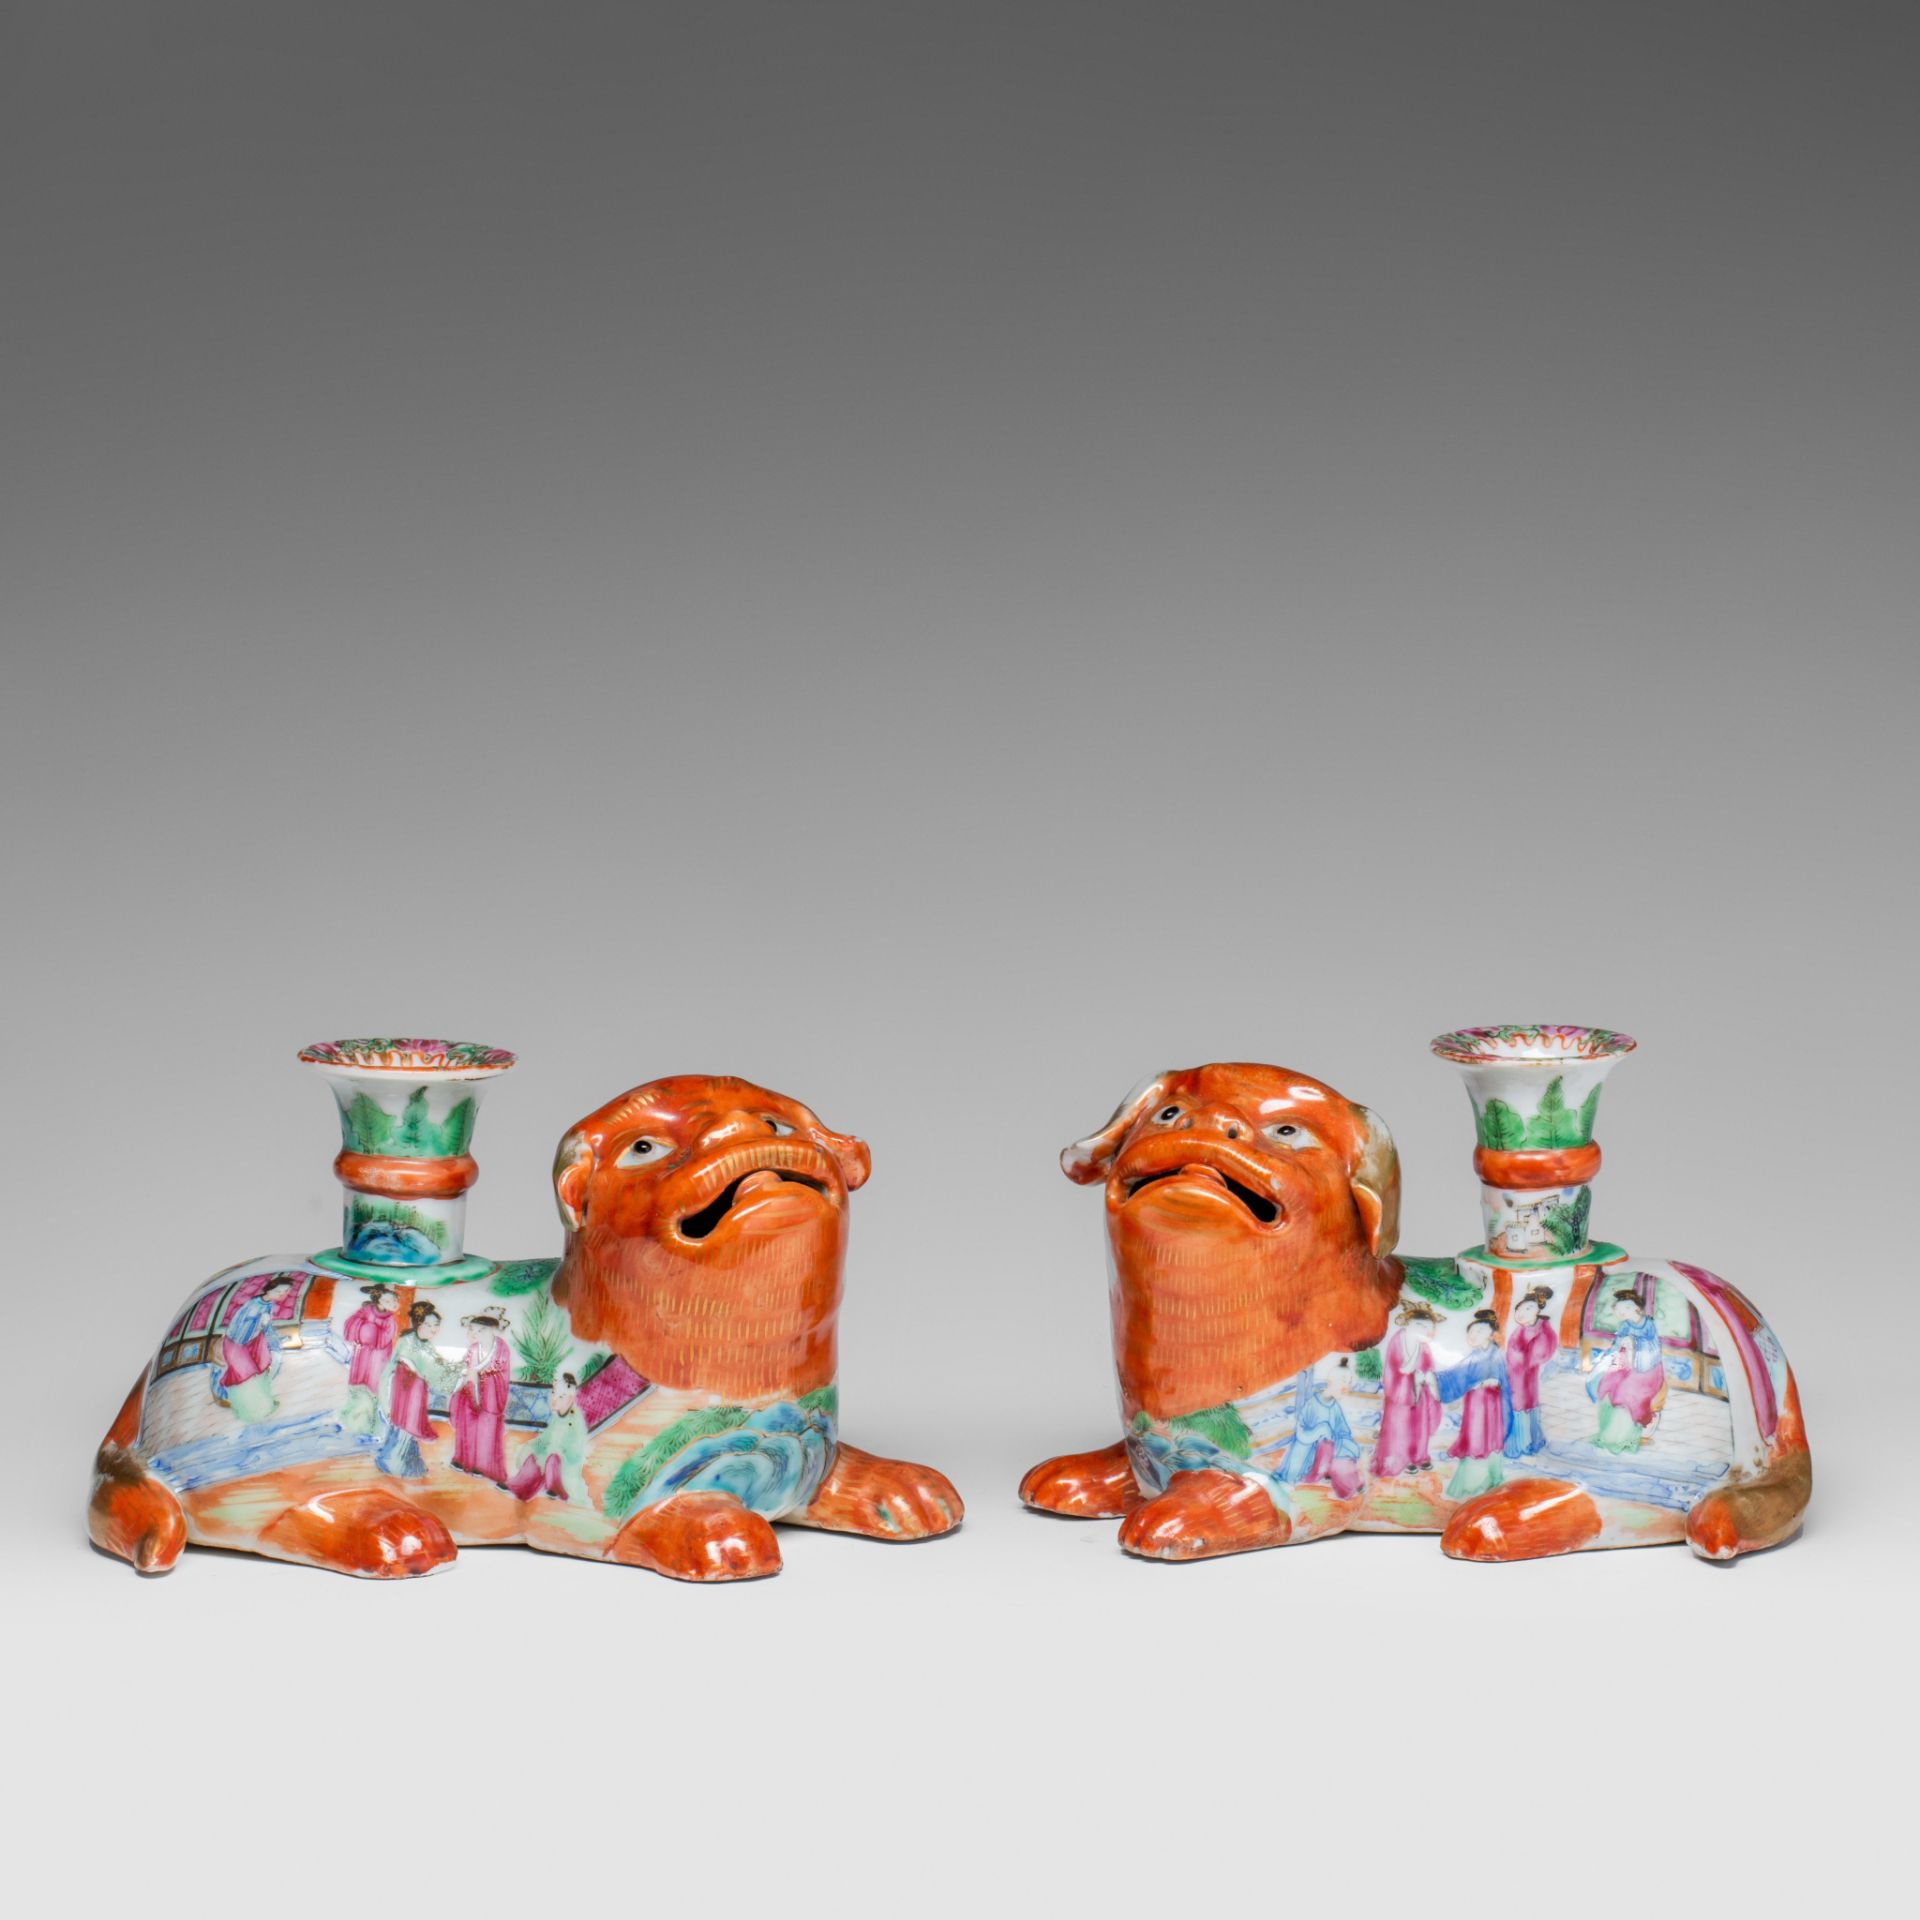 A fine pair of Chinese Canton joss stick holders in the shape of Fu dogs, 19thC, H 11,5 - L 20 cm - Image 2 of 9